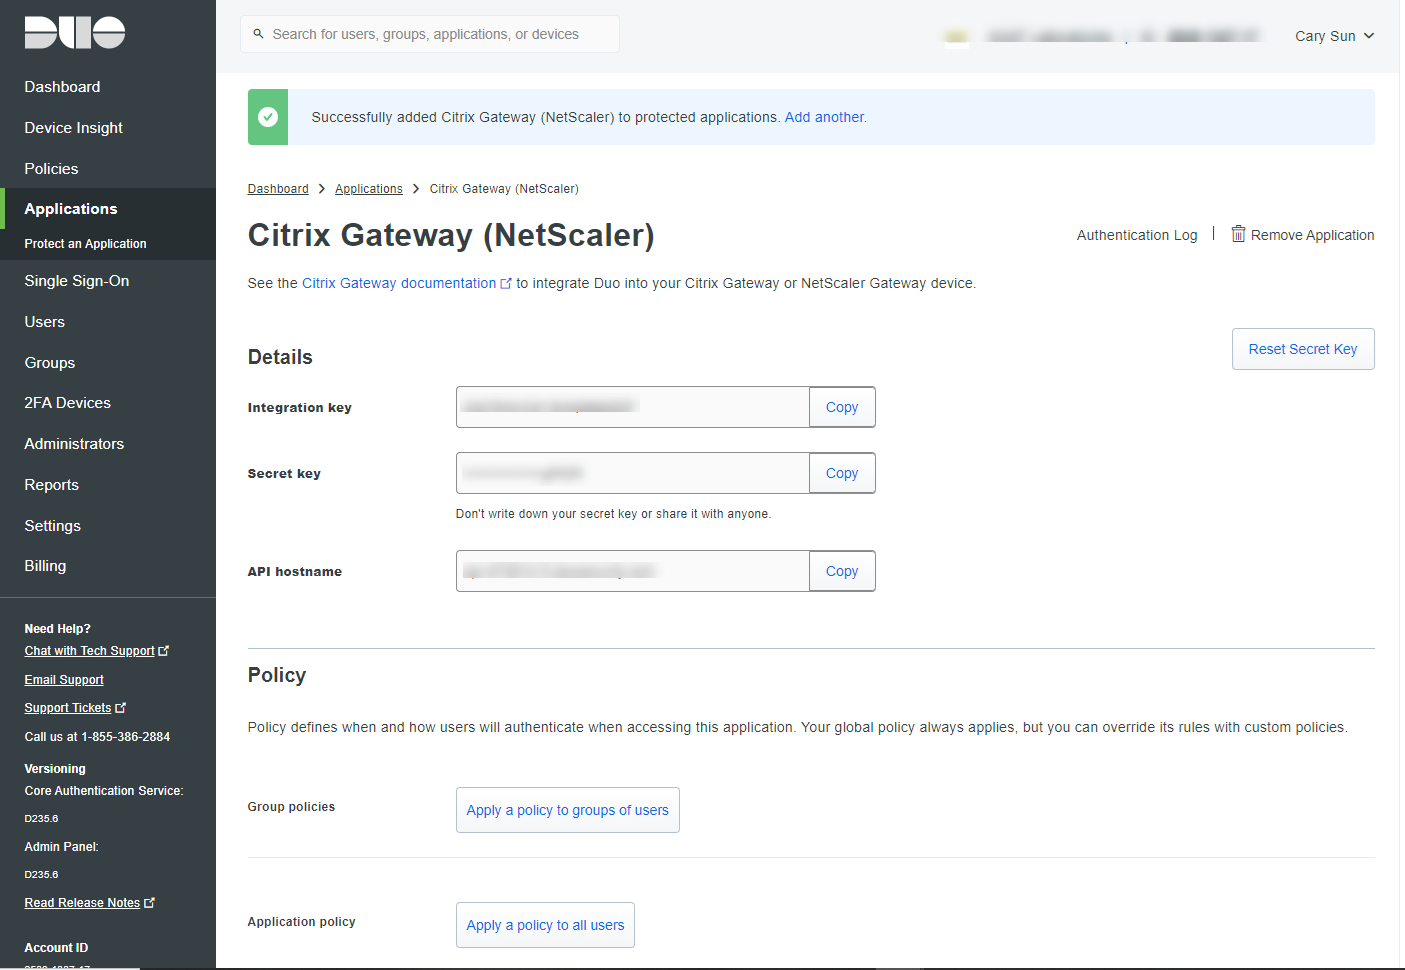 031422 2212 Howtodeploy4 - How to deploy Cisco Duo for Citrix (NetScaler) Gateway (Citrix ADC) - nFactor